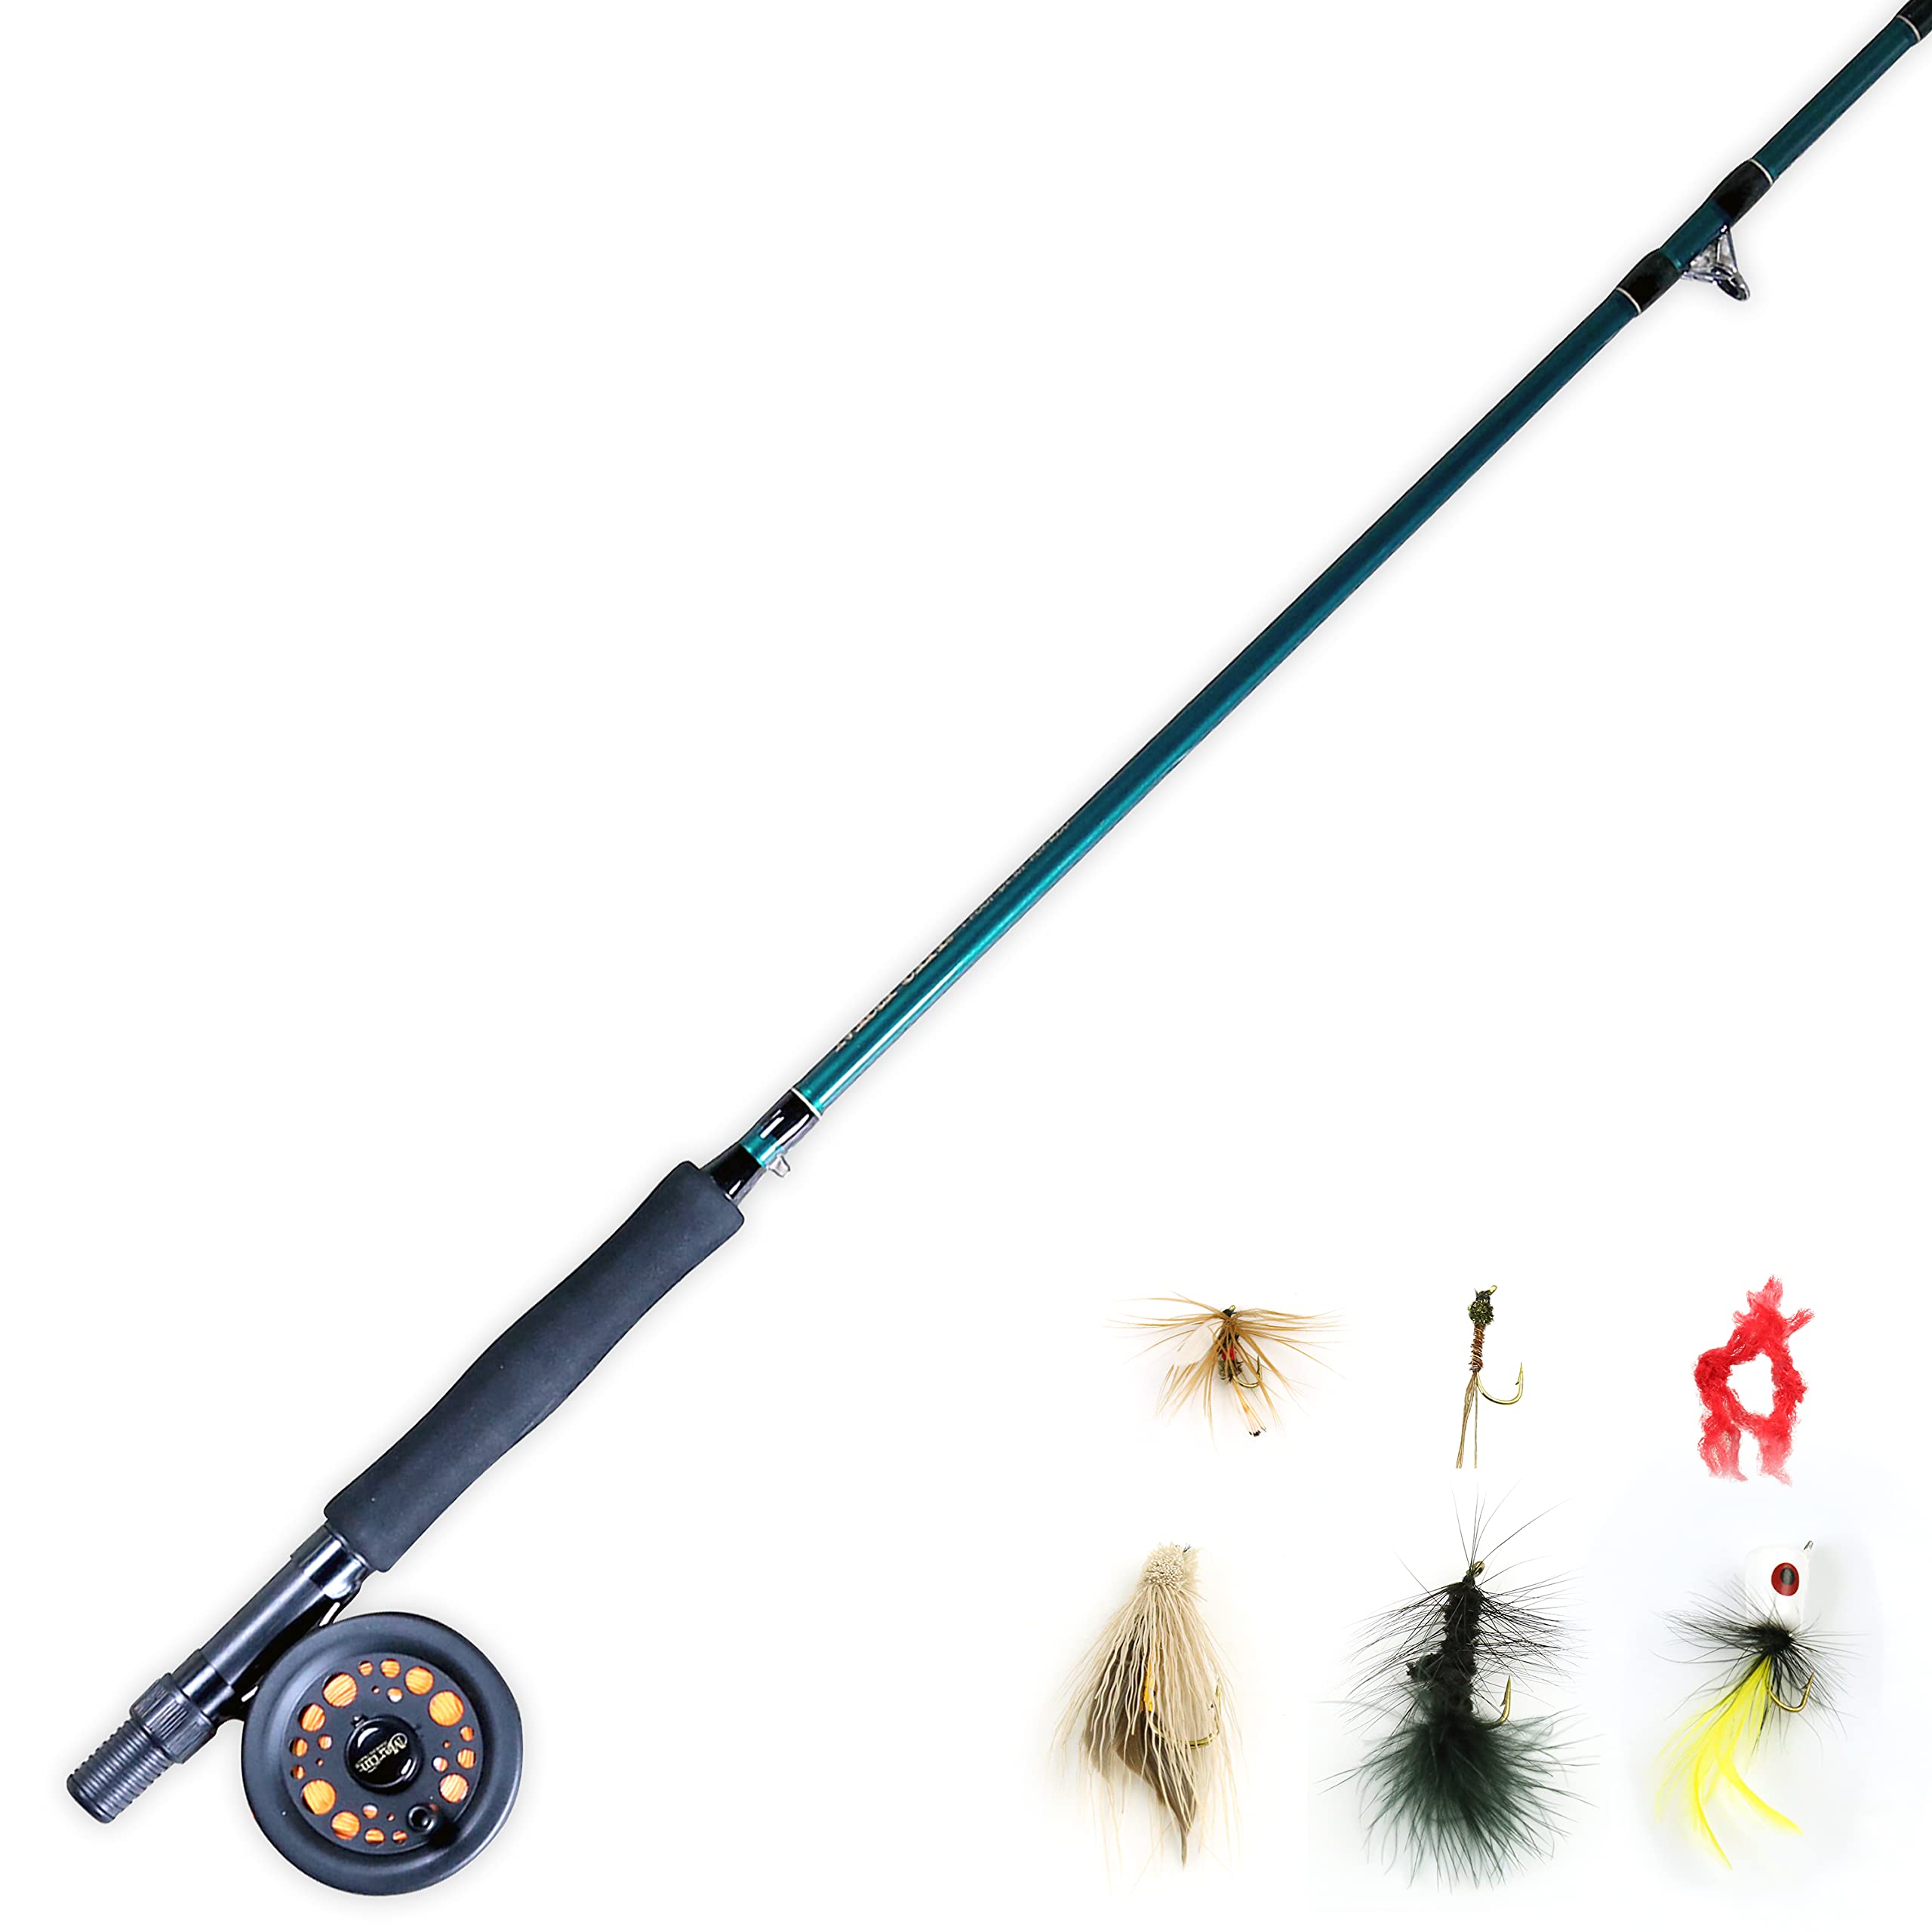 Martin Complete Fly Fishing Kit, 8-Foot 5/6-Weight 3-Piece Fly Fishing Pole,  Size